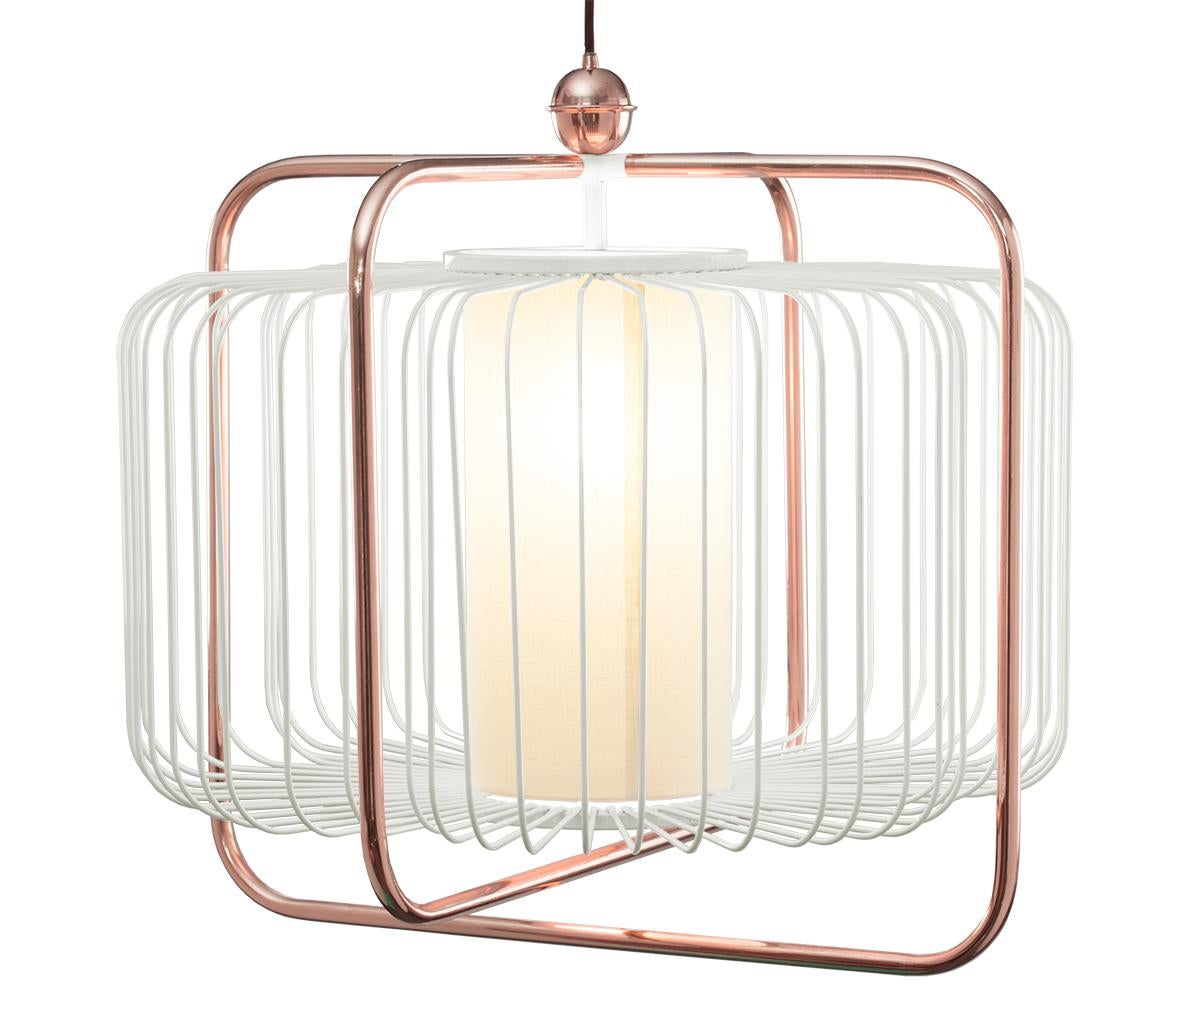 Contemporary Art Deco Inspired Jules I Pendant Lamp in Copper, Taupe and Linen For Sale 6